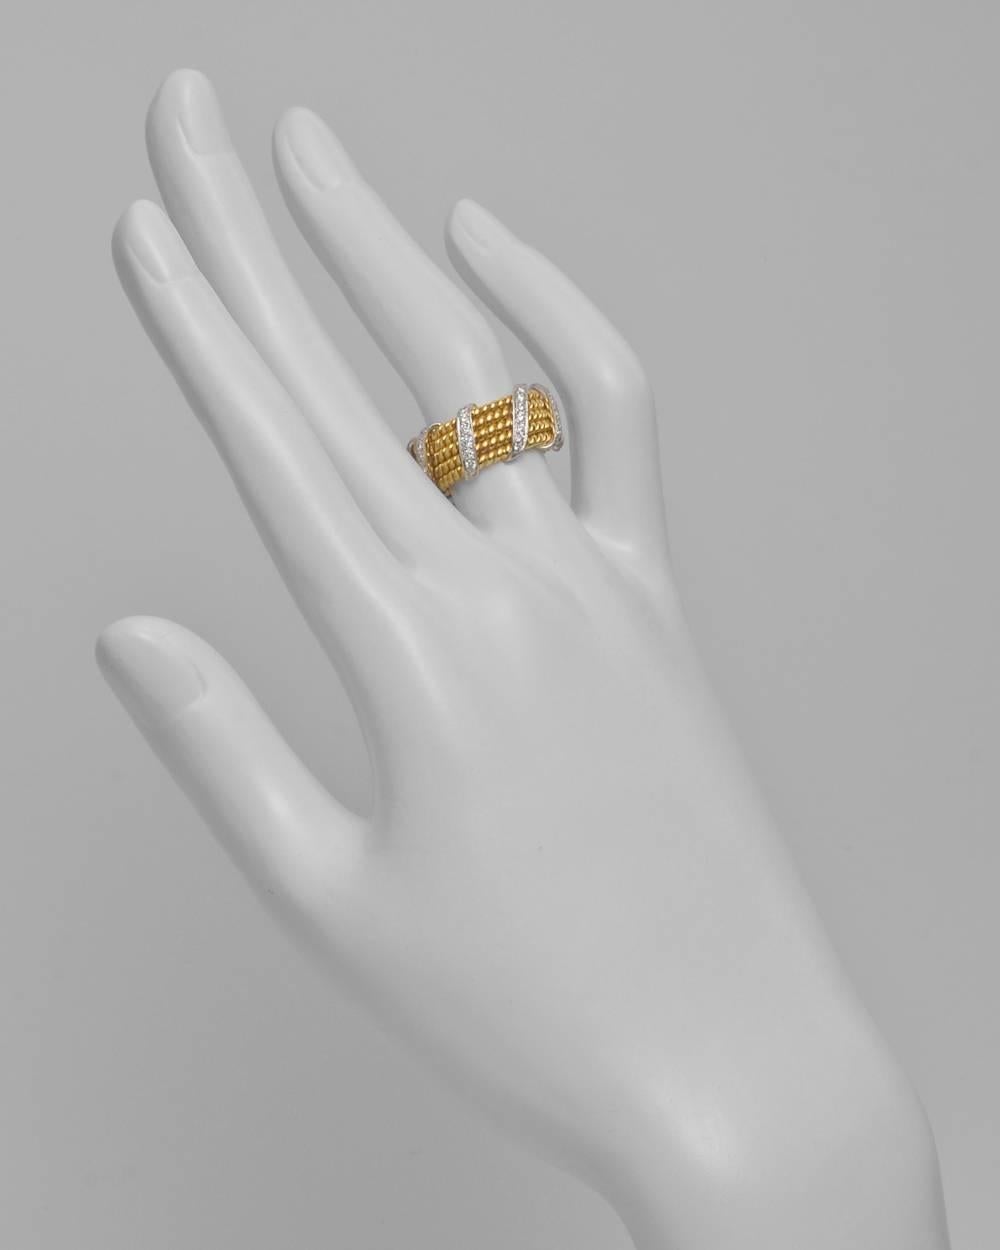 Wide band ring, designed with 18k yellow gold twisted in a 5-row rope-patterned band accented by full-cut round diamond-set diagonal wrap bands in platinum, signed Schlumberger for Tiffany & Co. 56 diamonds weighing approximately 0.60 total carats